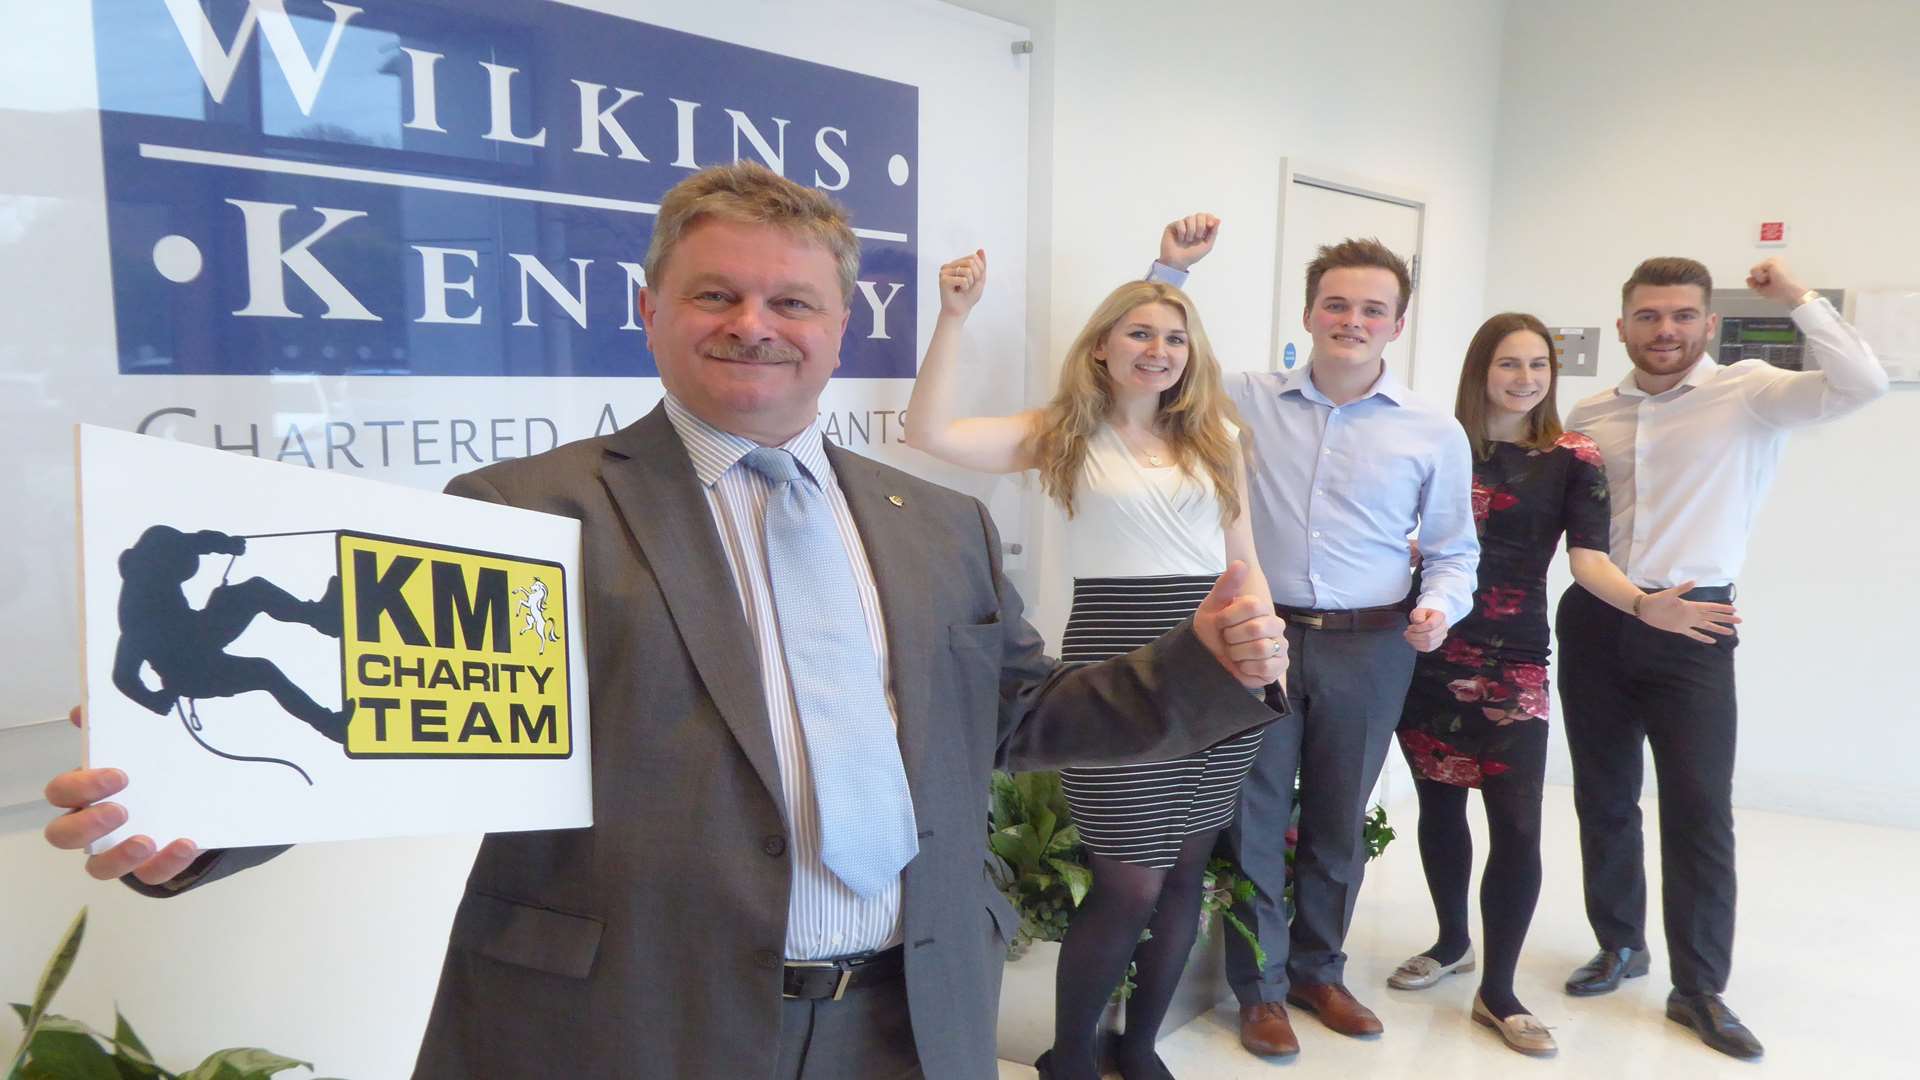 Mike Startup and the Wilkins Kennedy team are supporting the KM Abseil Challenge.